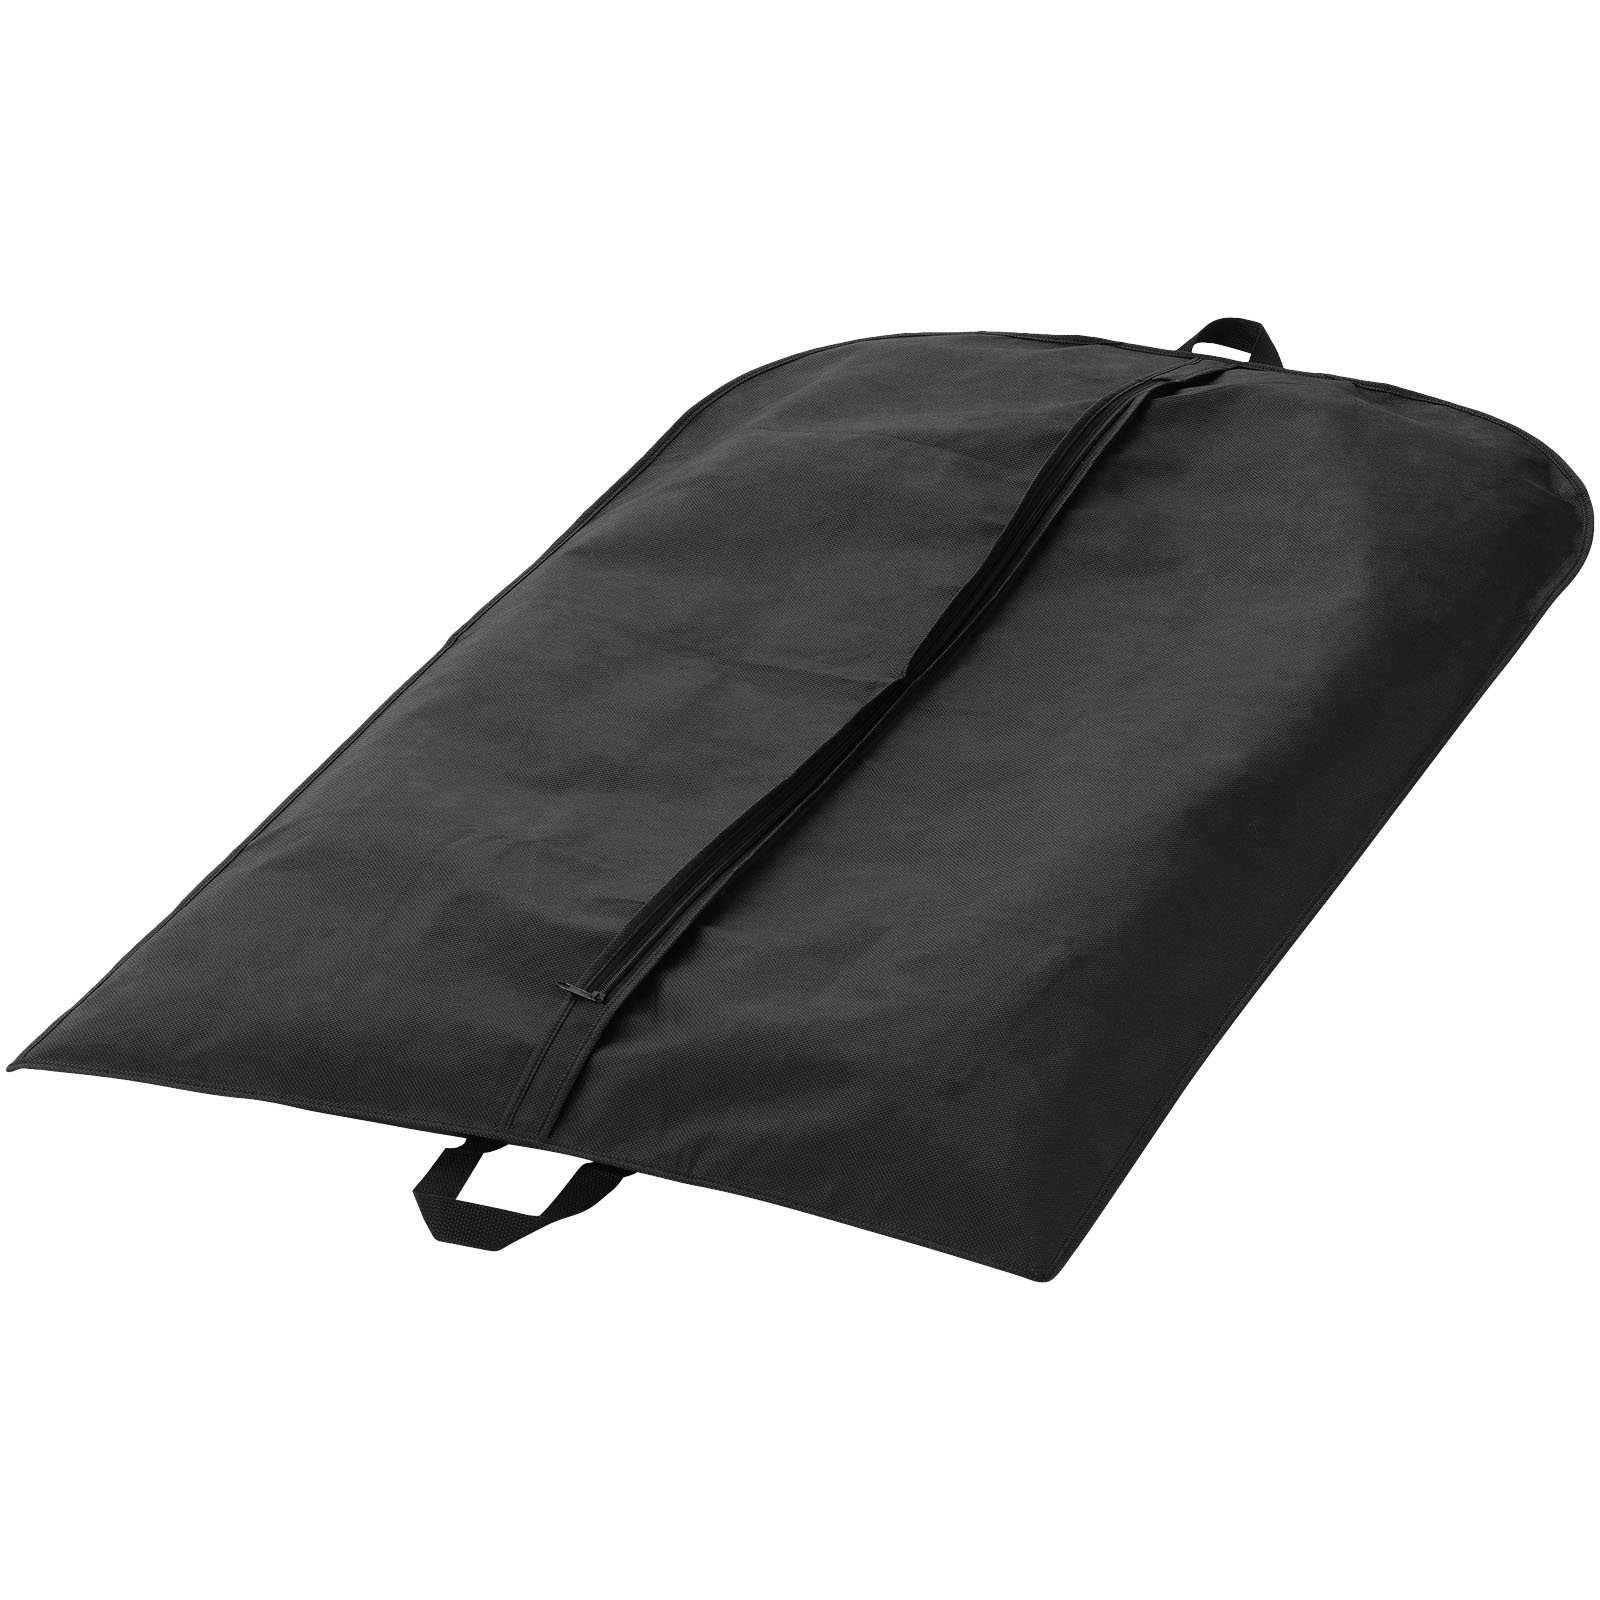 A bag designed to carry and protect suits or other formal wear during travel. - Prescot